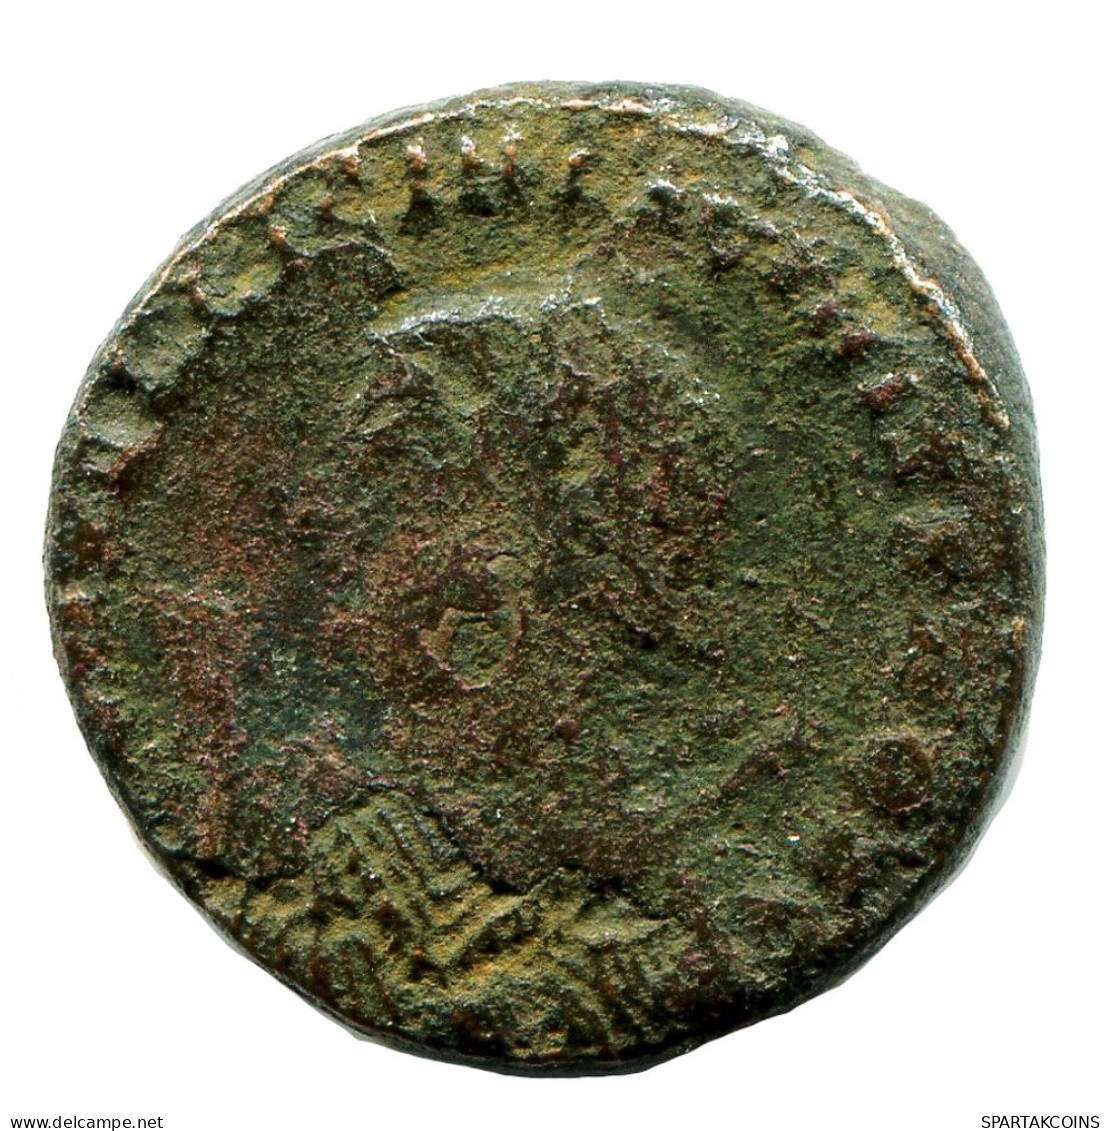 LICINIUS II MINTED IN ANTIOCH FOUND IN IHNASYAH HOARD EGYPT #ANC11098.14.U.A - The Christian Empire (307 AD Tot 363 AD)